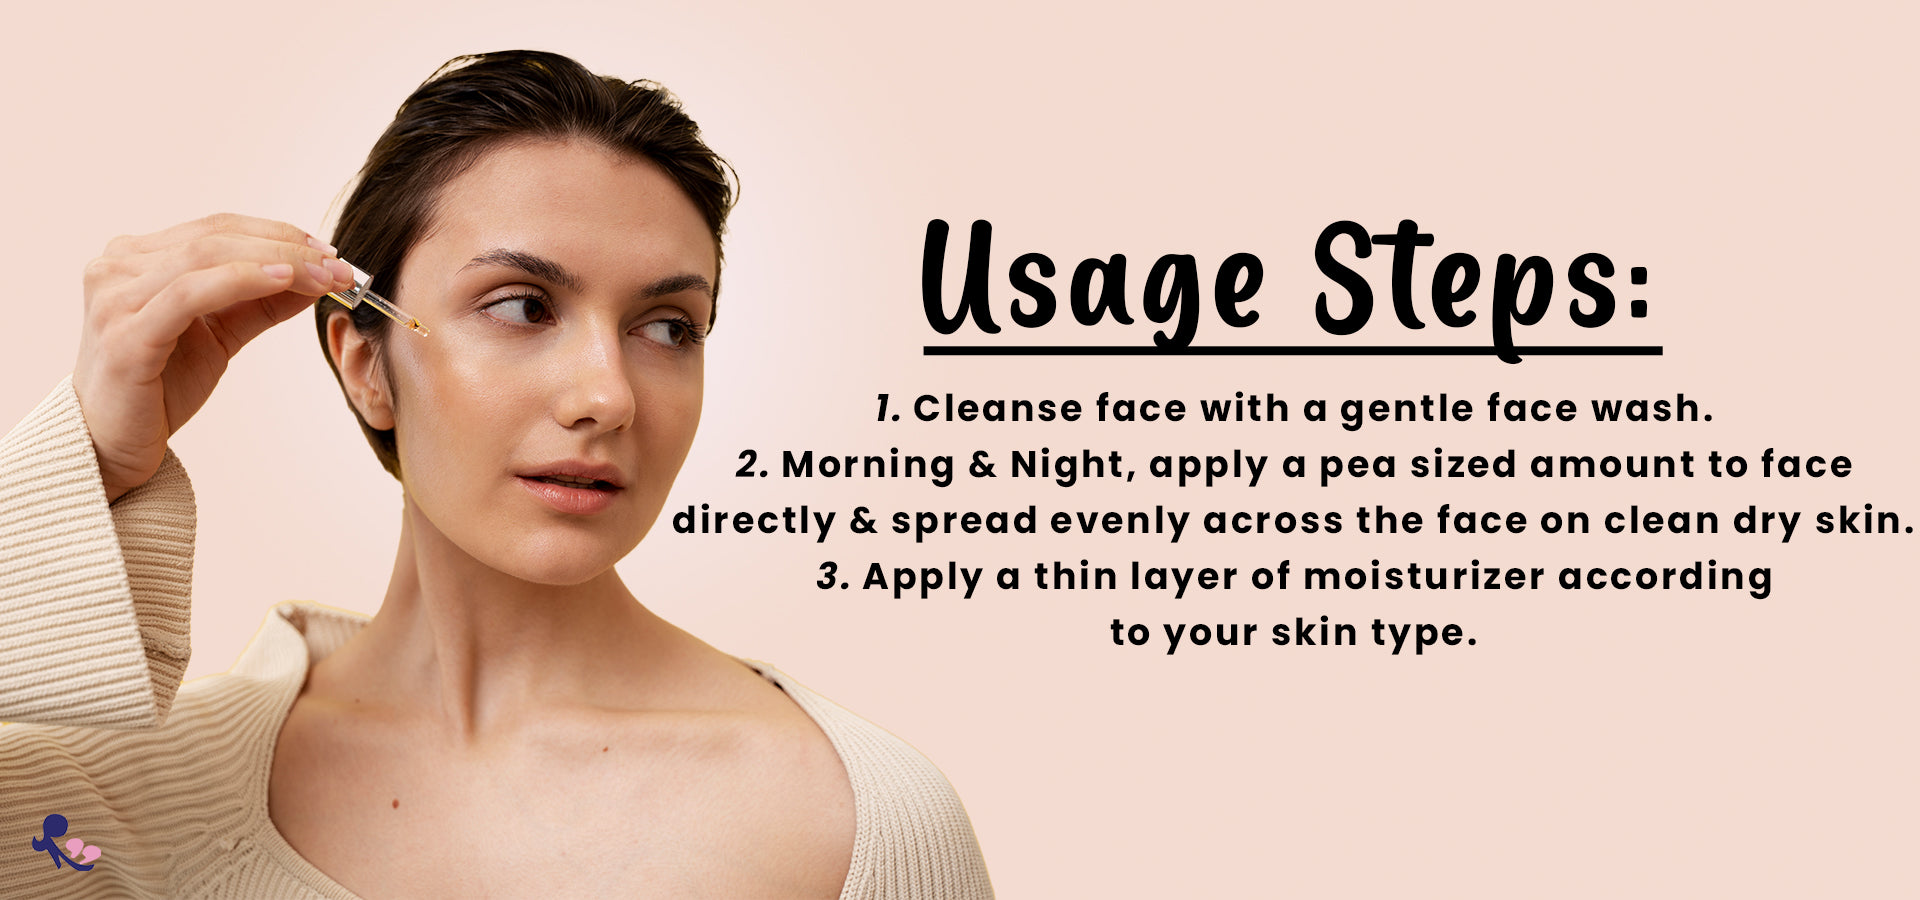 How to apply skin serum | Usage steps by MomDaughts'